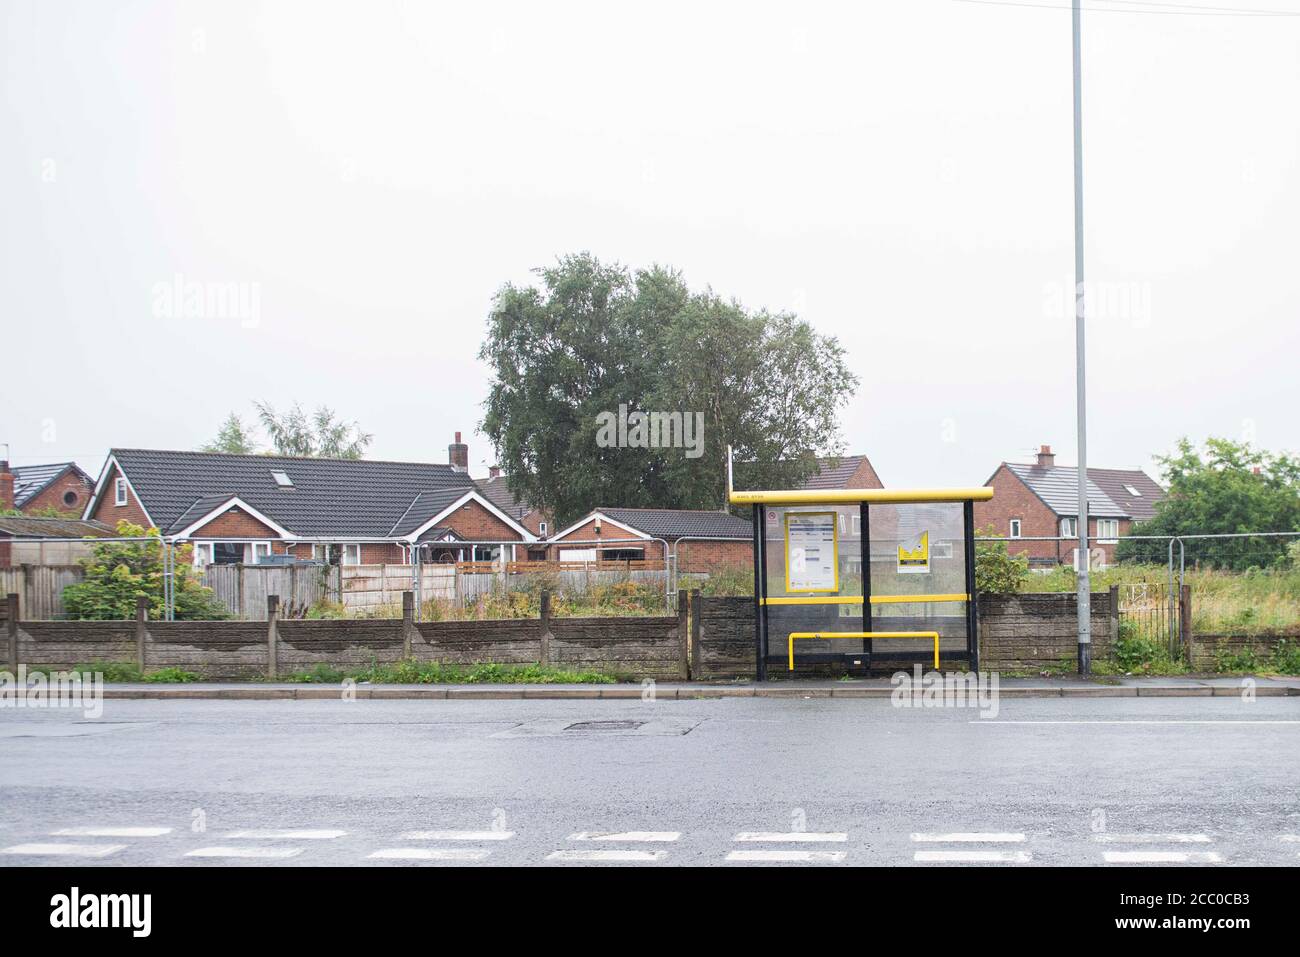 A bus stop sit in front of land for development. Stock Photo